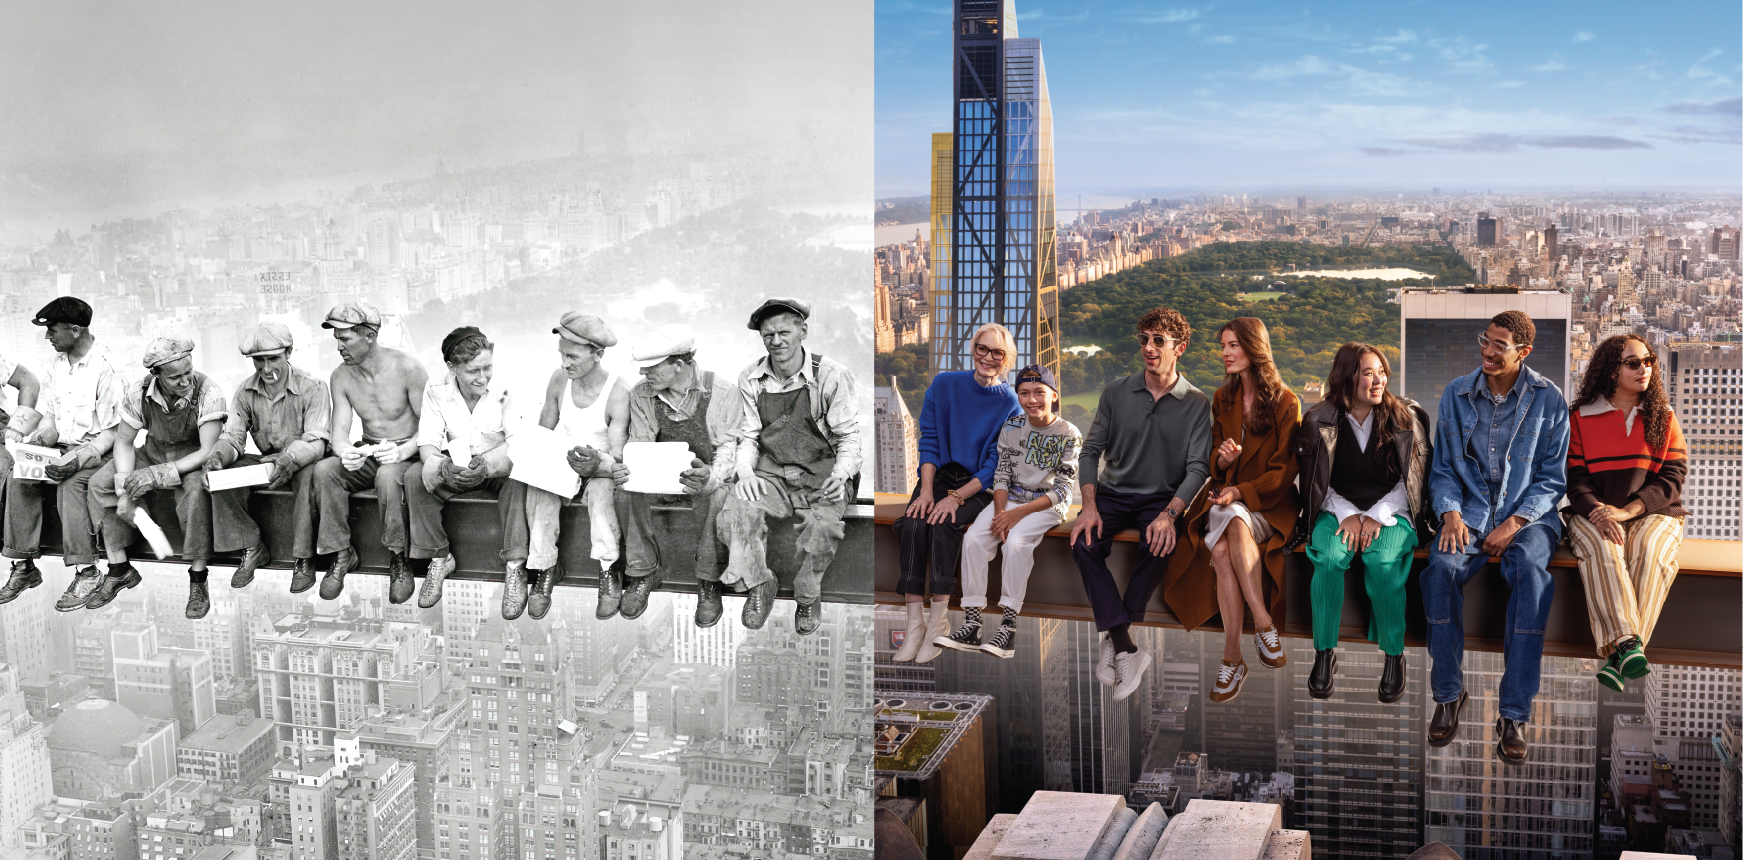 The Beam at Rockefeller Center, people sitting on a beam 70 years ago and now, 30 rockefeller plaza